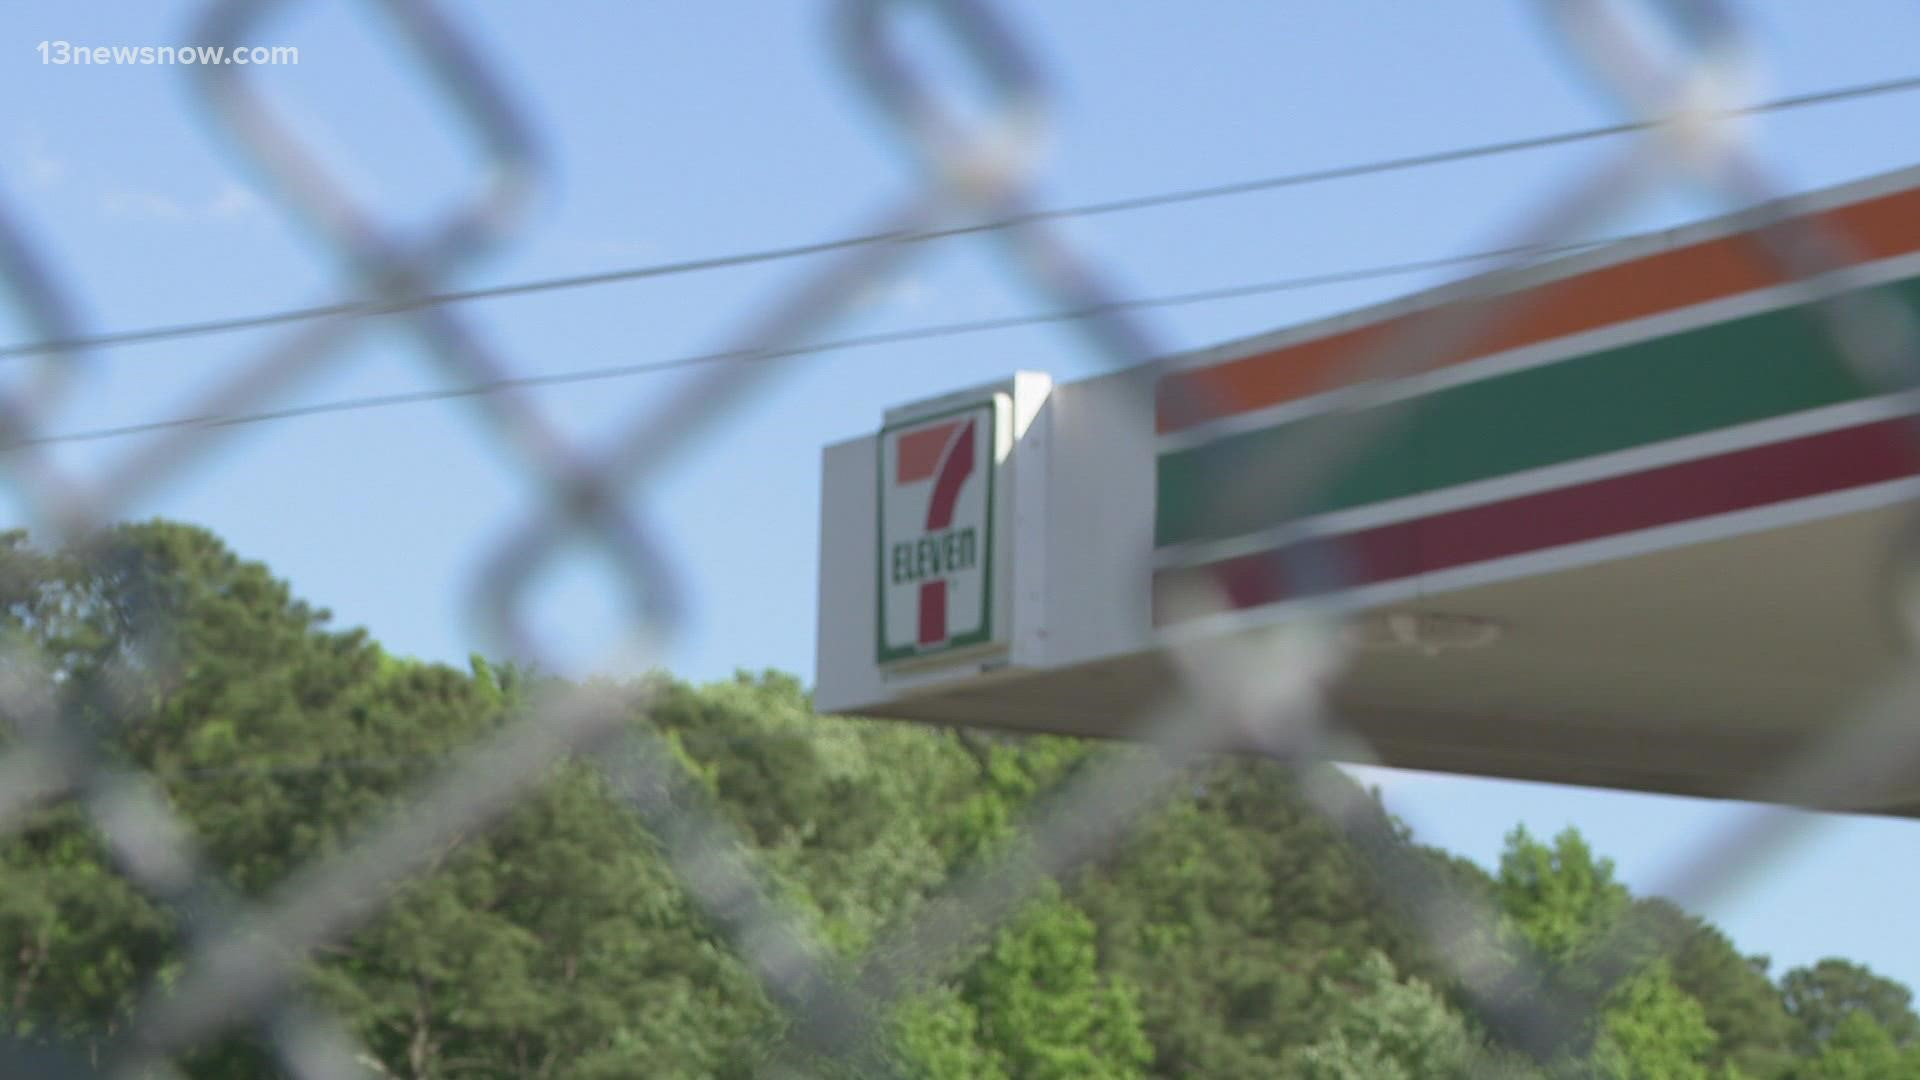 Investigators said in the early hours of May 16, two people went into a 7-Eleven in Gloucester Point and used a chainsaw to steal money from gaming machines.